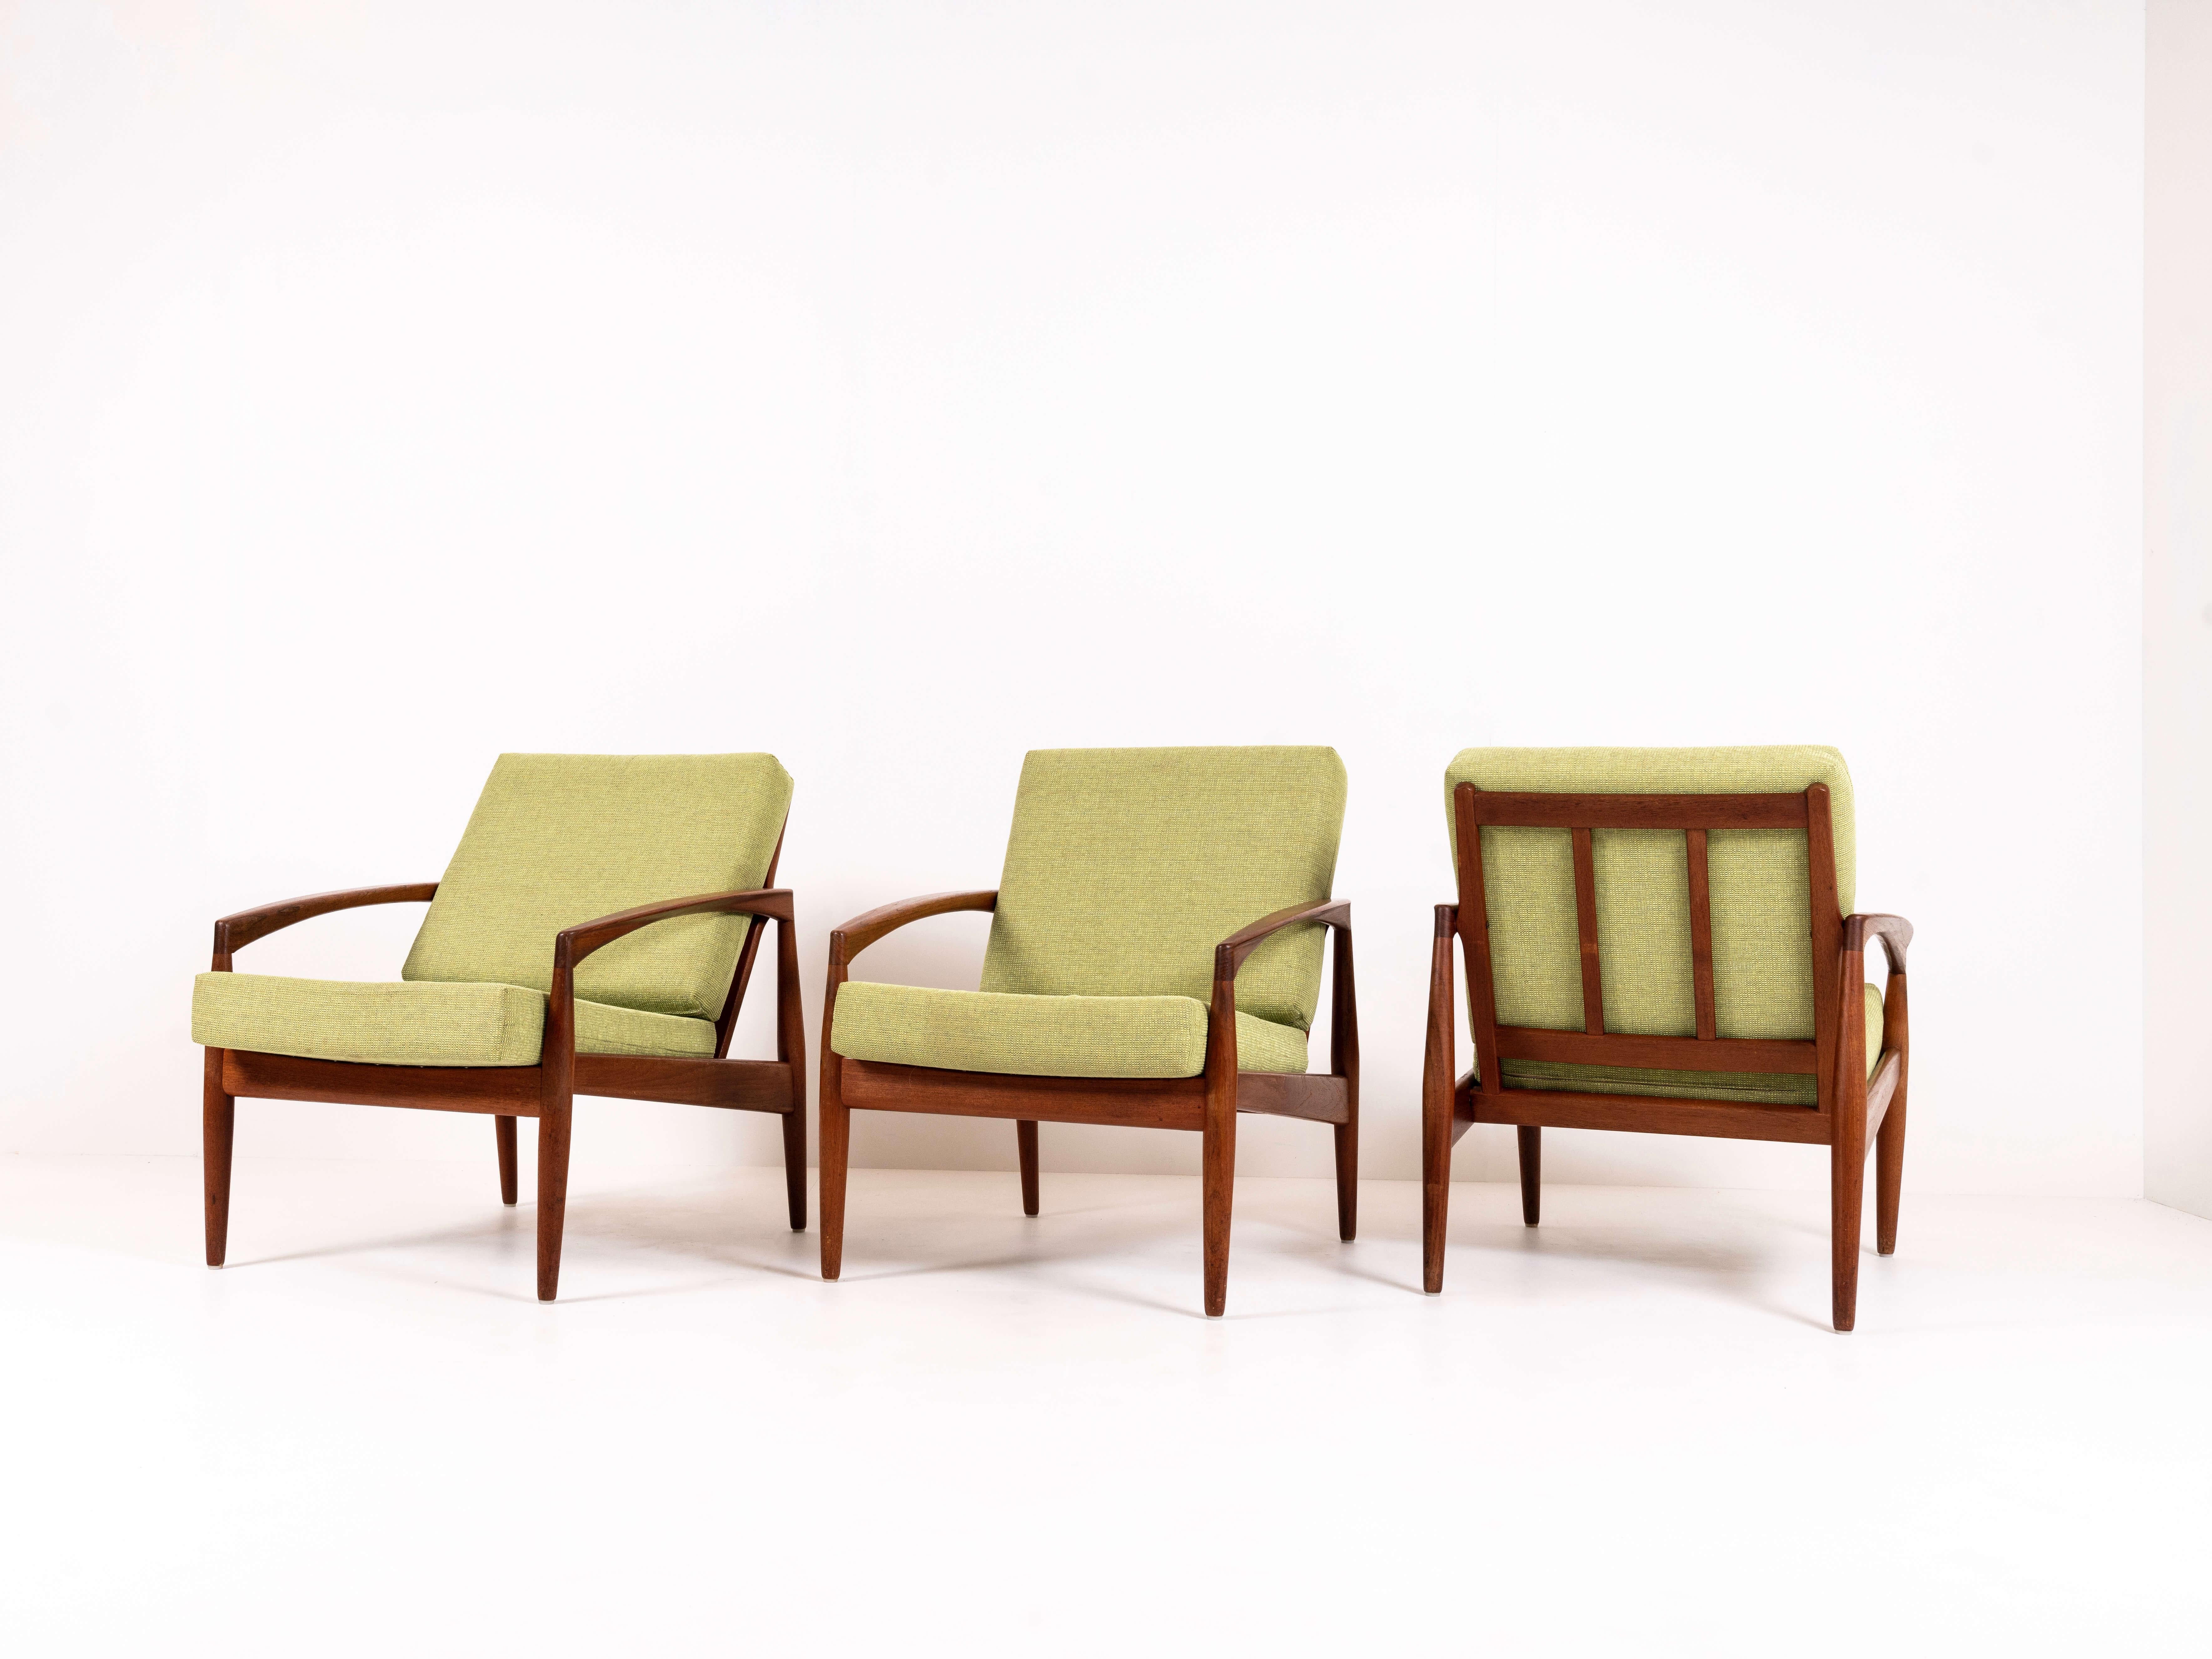 Set of three paper knife chairs, model 121, by Kai Kristiansen for Magnus Olesen from Denmark 1960s. These chairs in teak have a truly an iconic, organic design; round arm rests and a backrest that is slightly moved backwards for comfortable